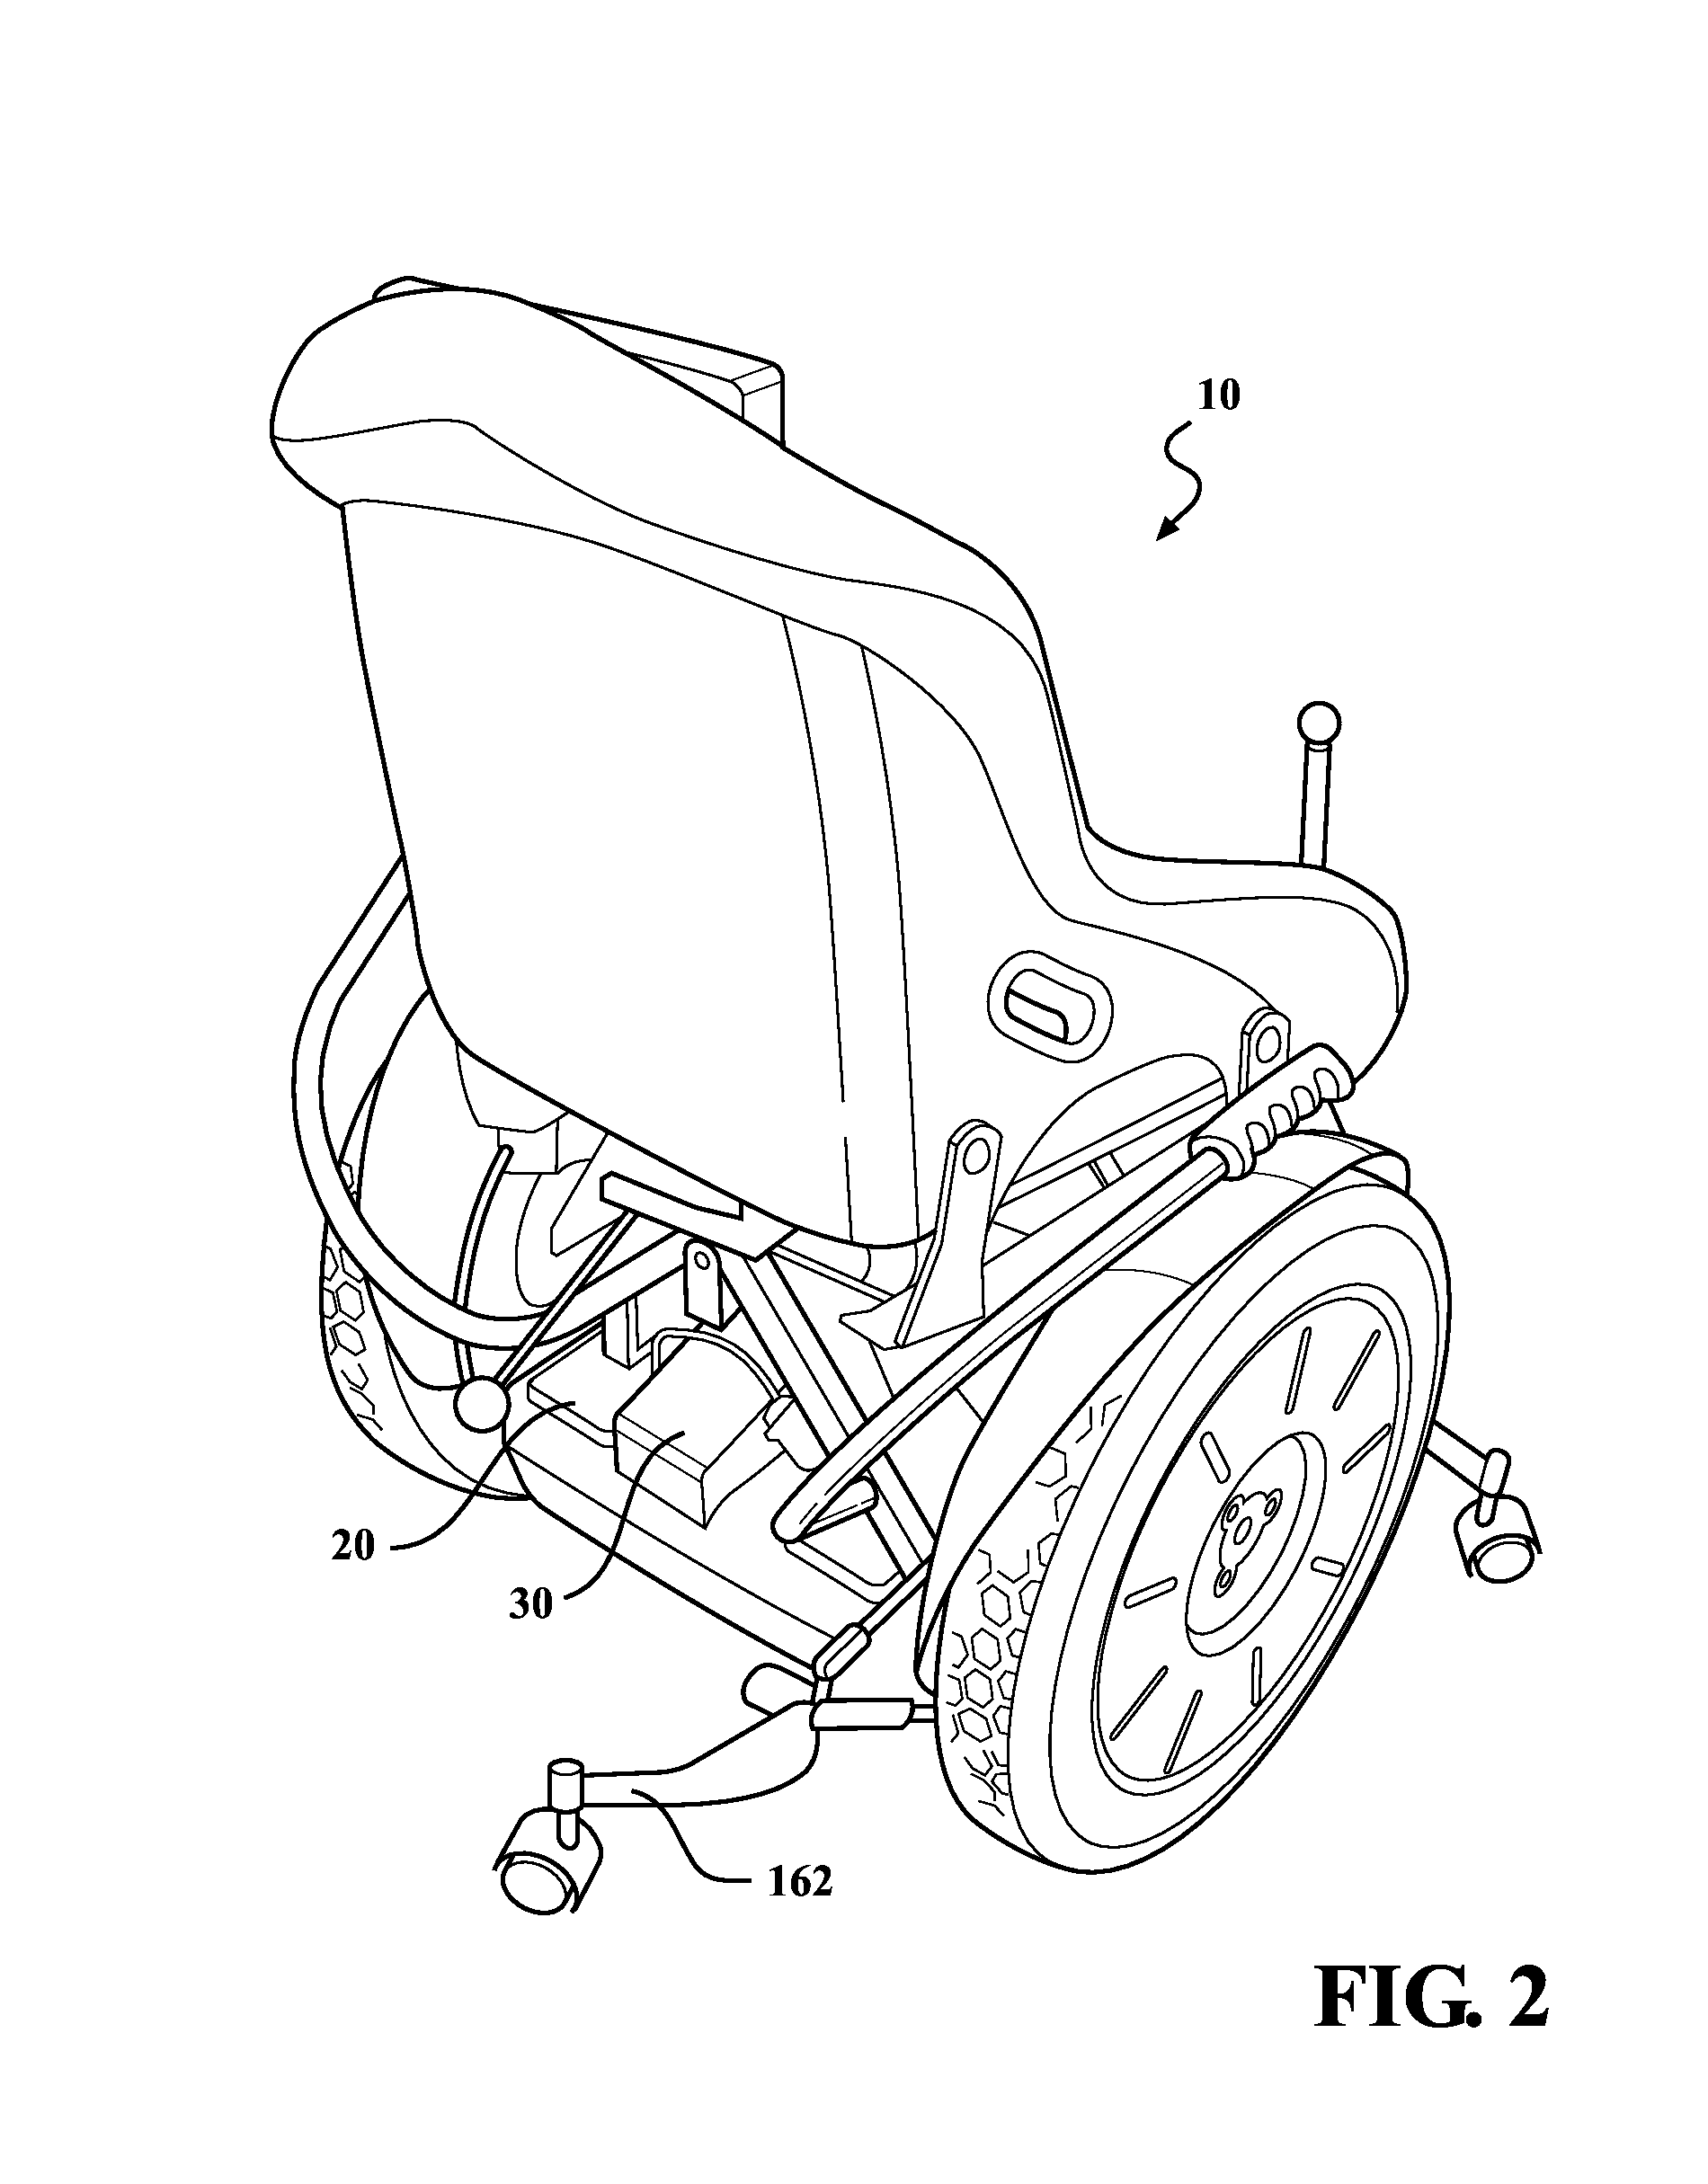 Powered mobility device